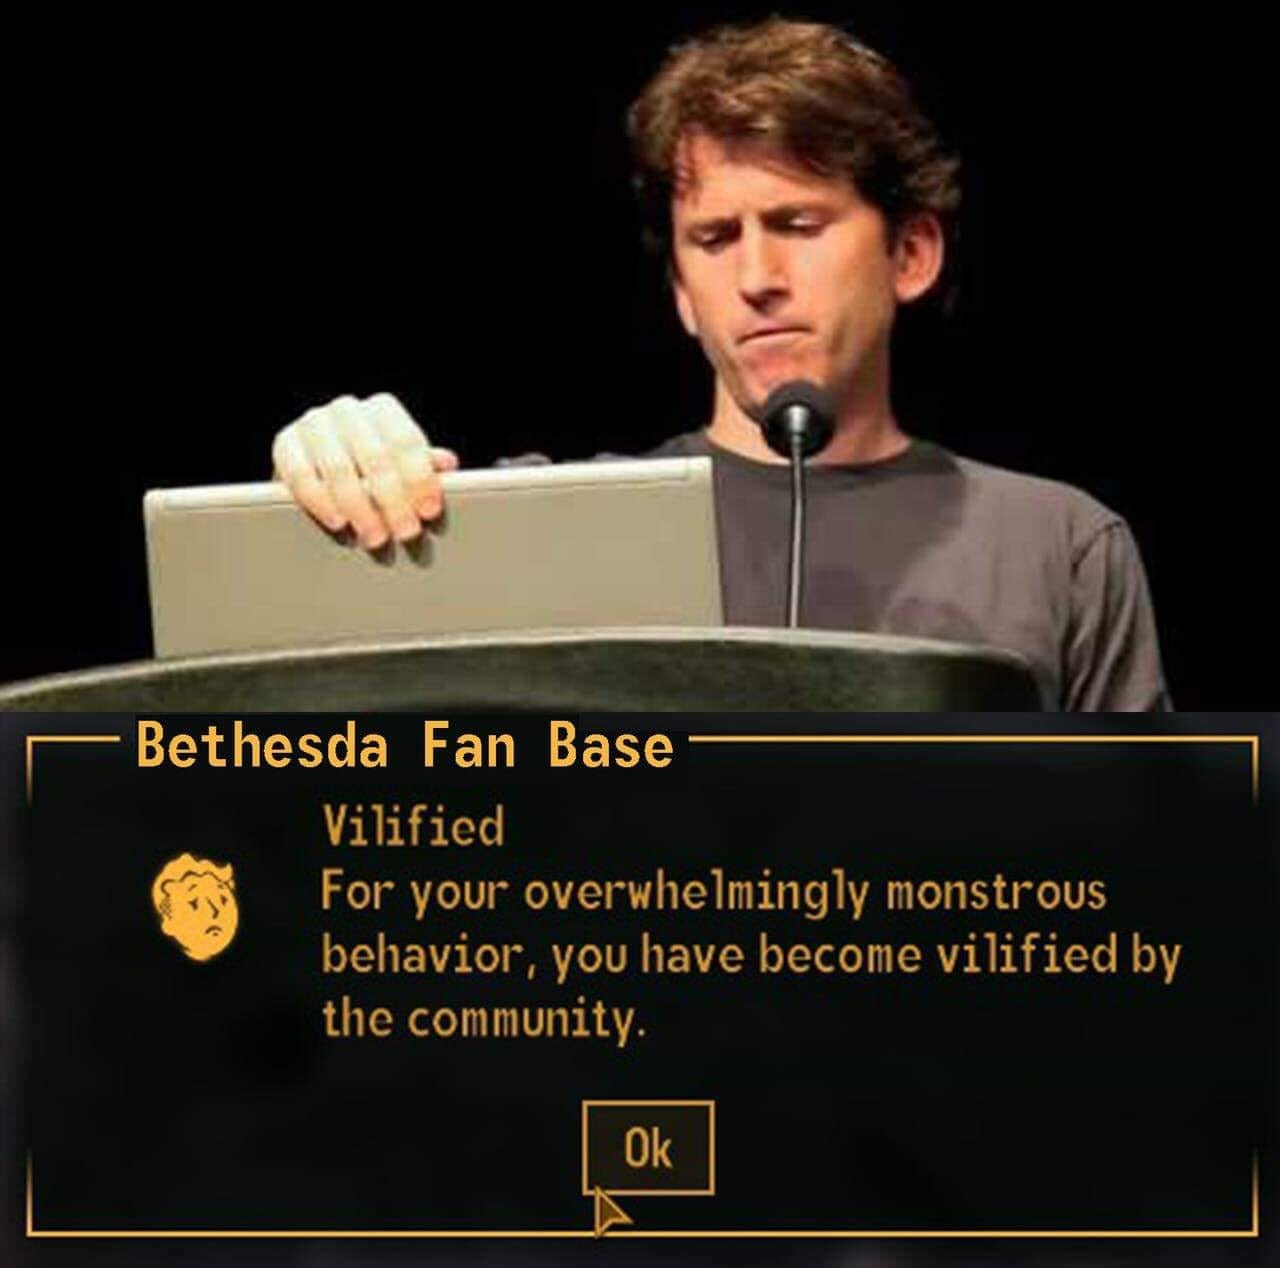 todd howard vilified - Bethesda Fan Base Vilified For your overwhelmingly monstrous behavior, you have become vilified by the community. Ok